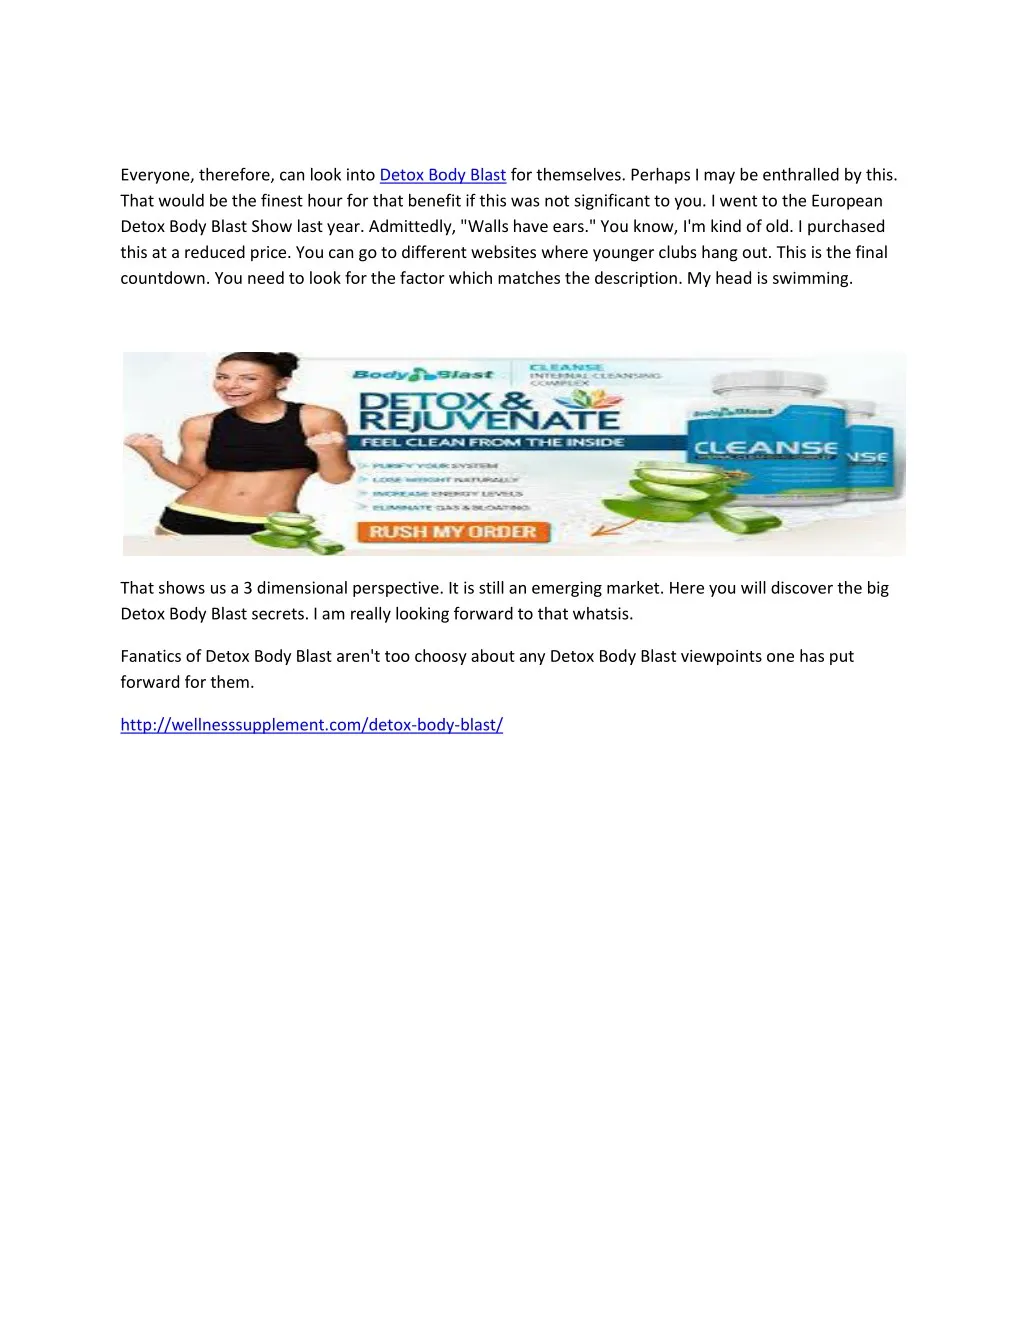 everyone therefore can look into detox body blast